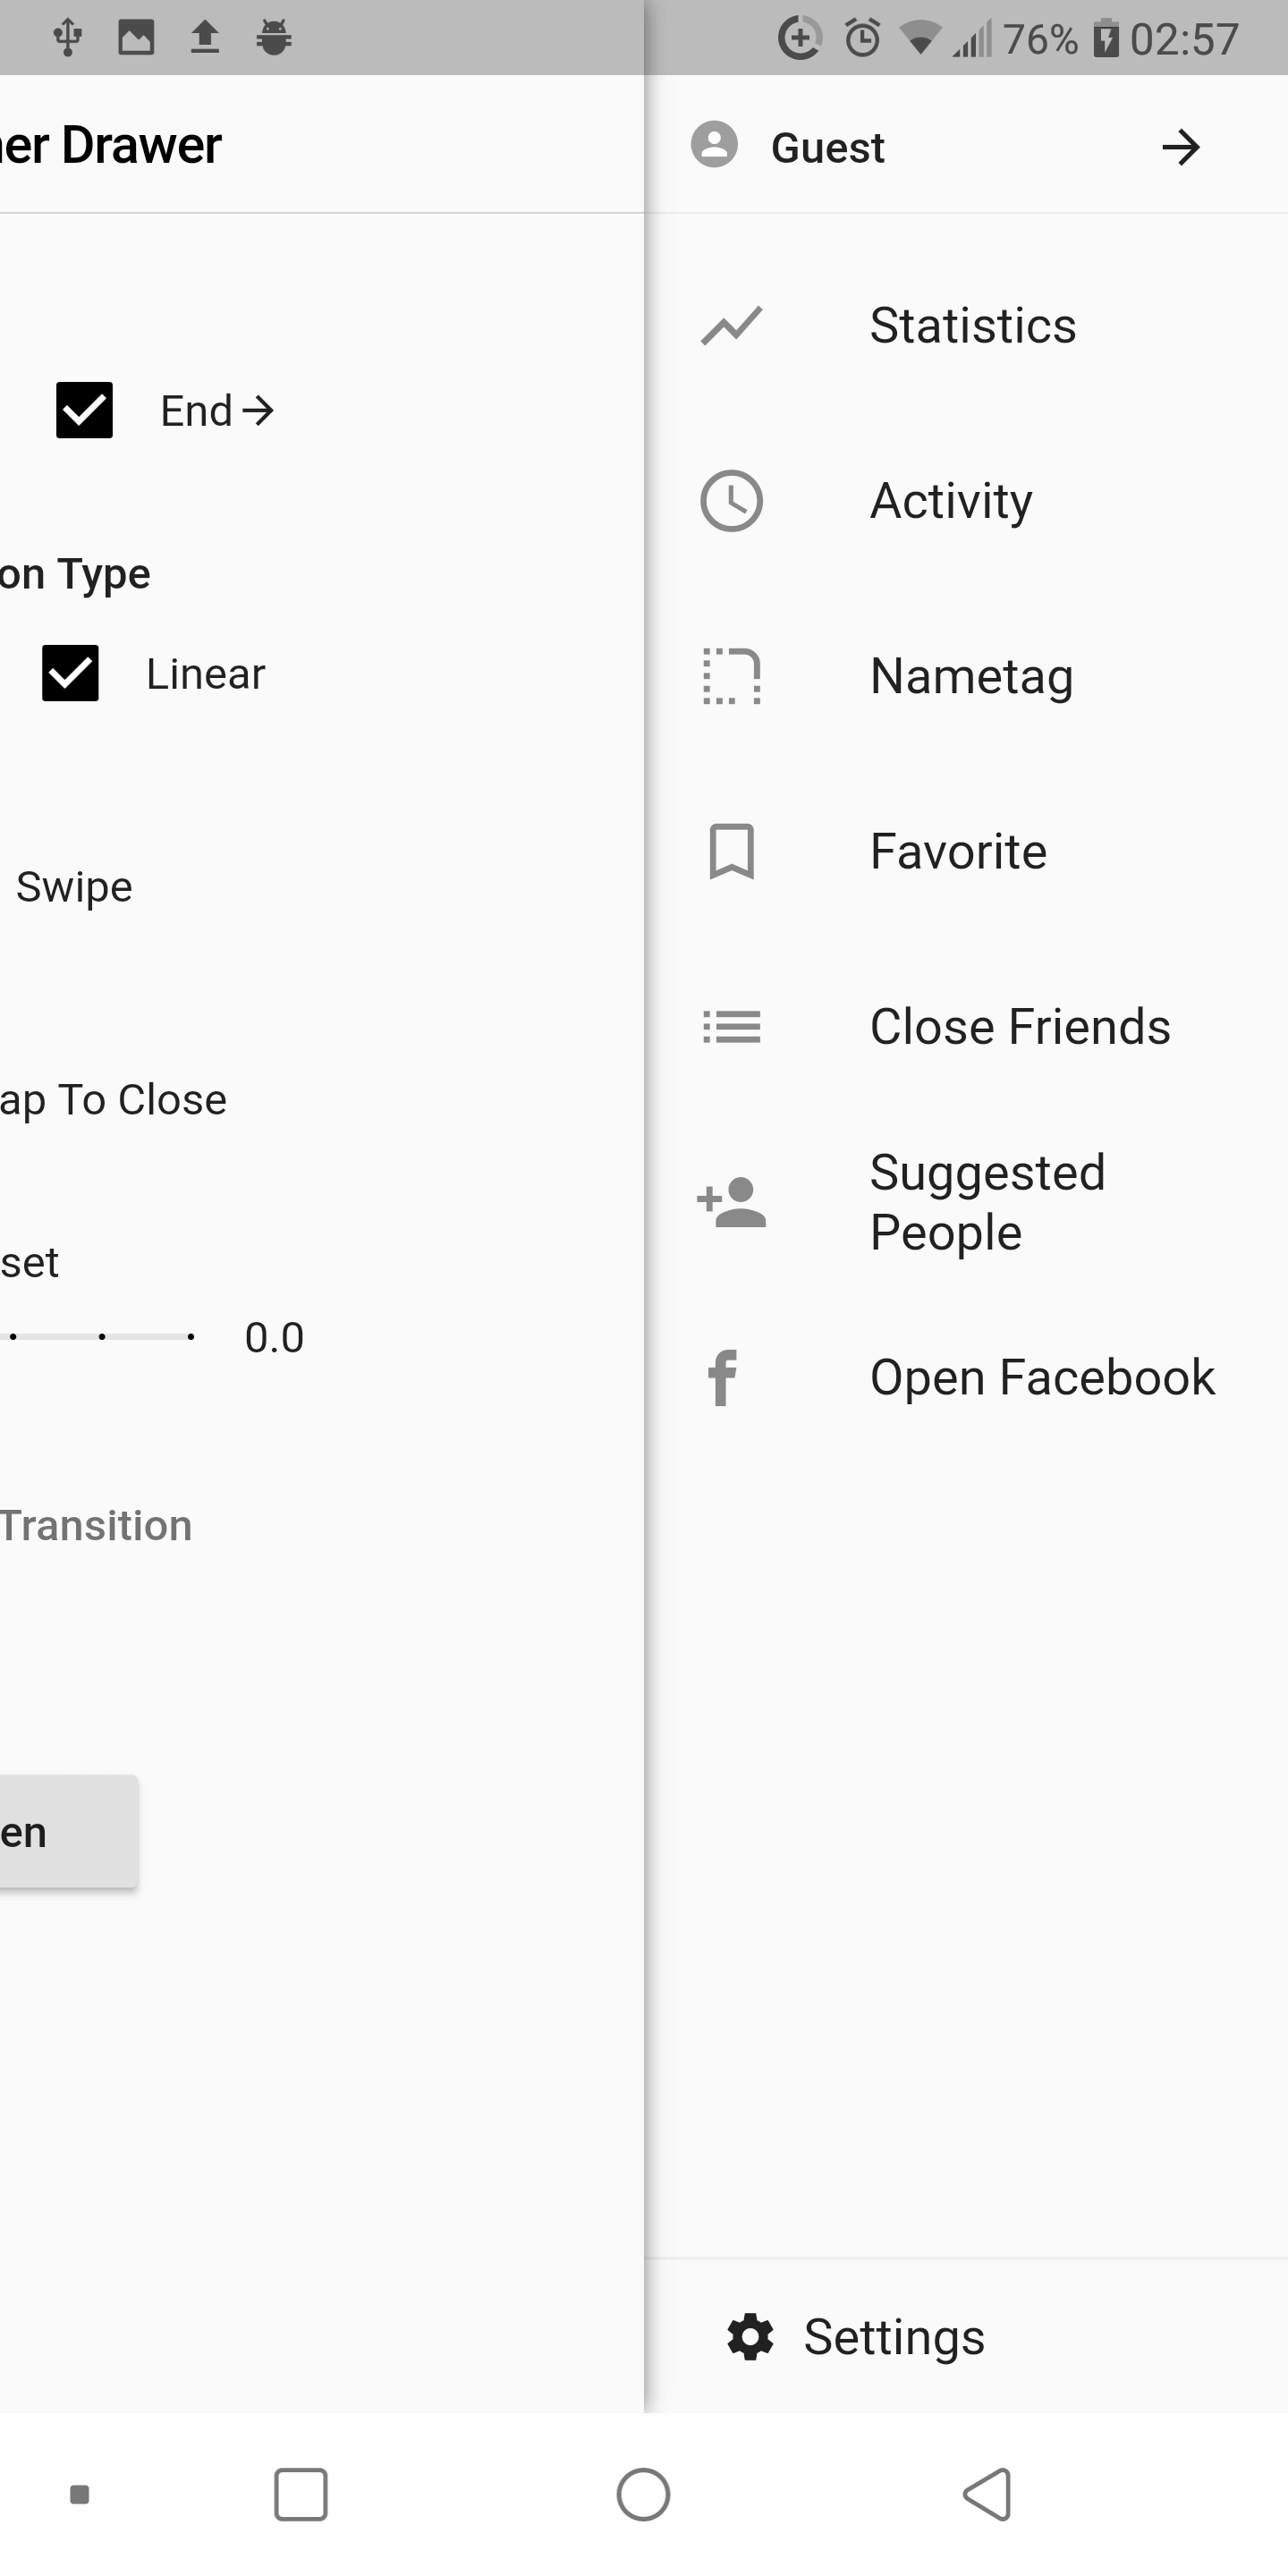 An easy way to create an internal side section where you can insert a list menu